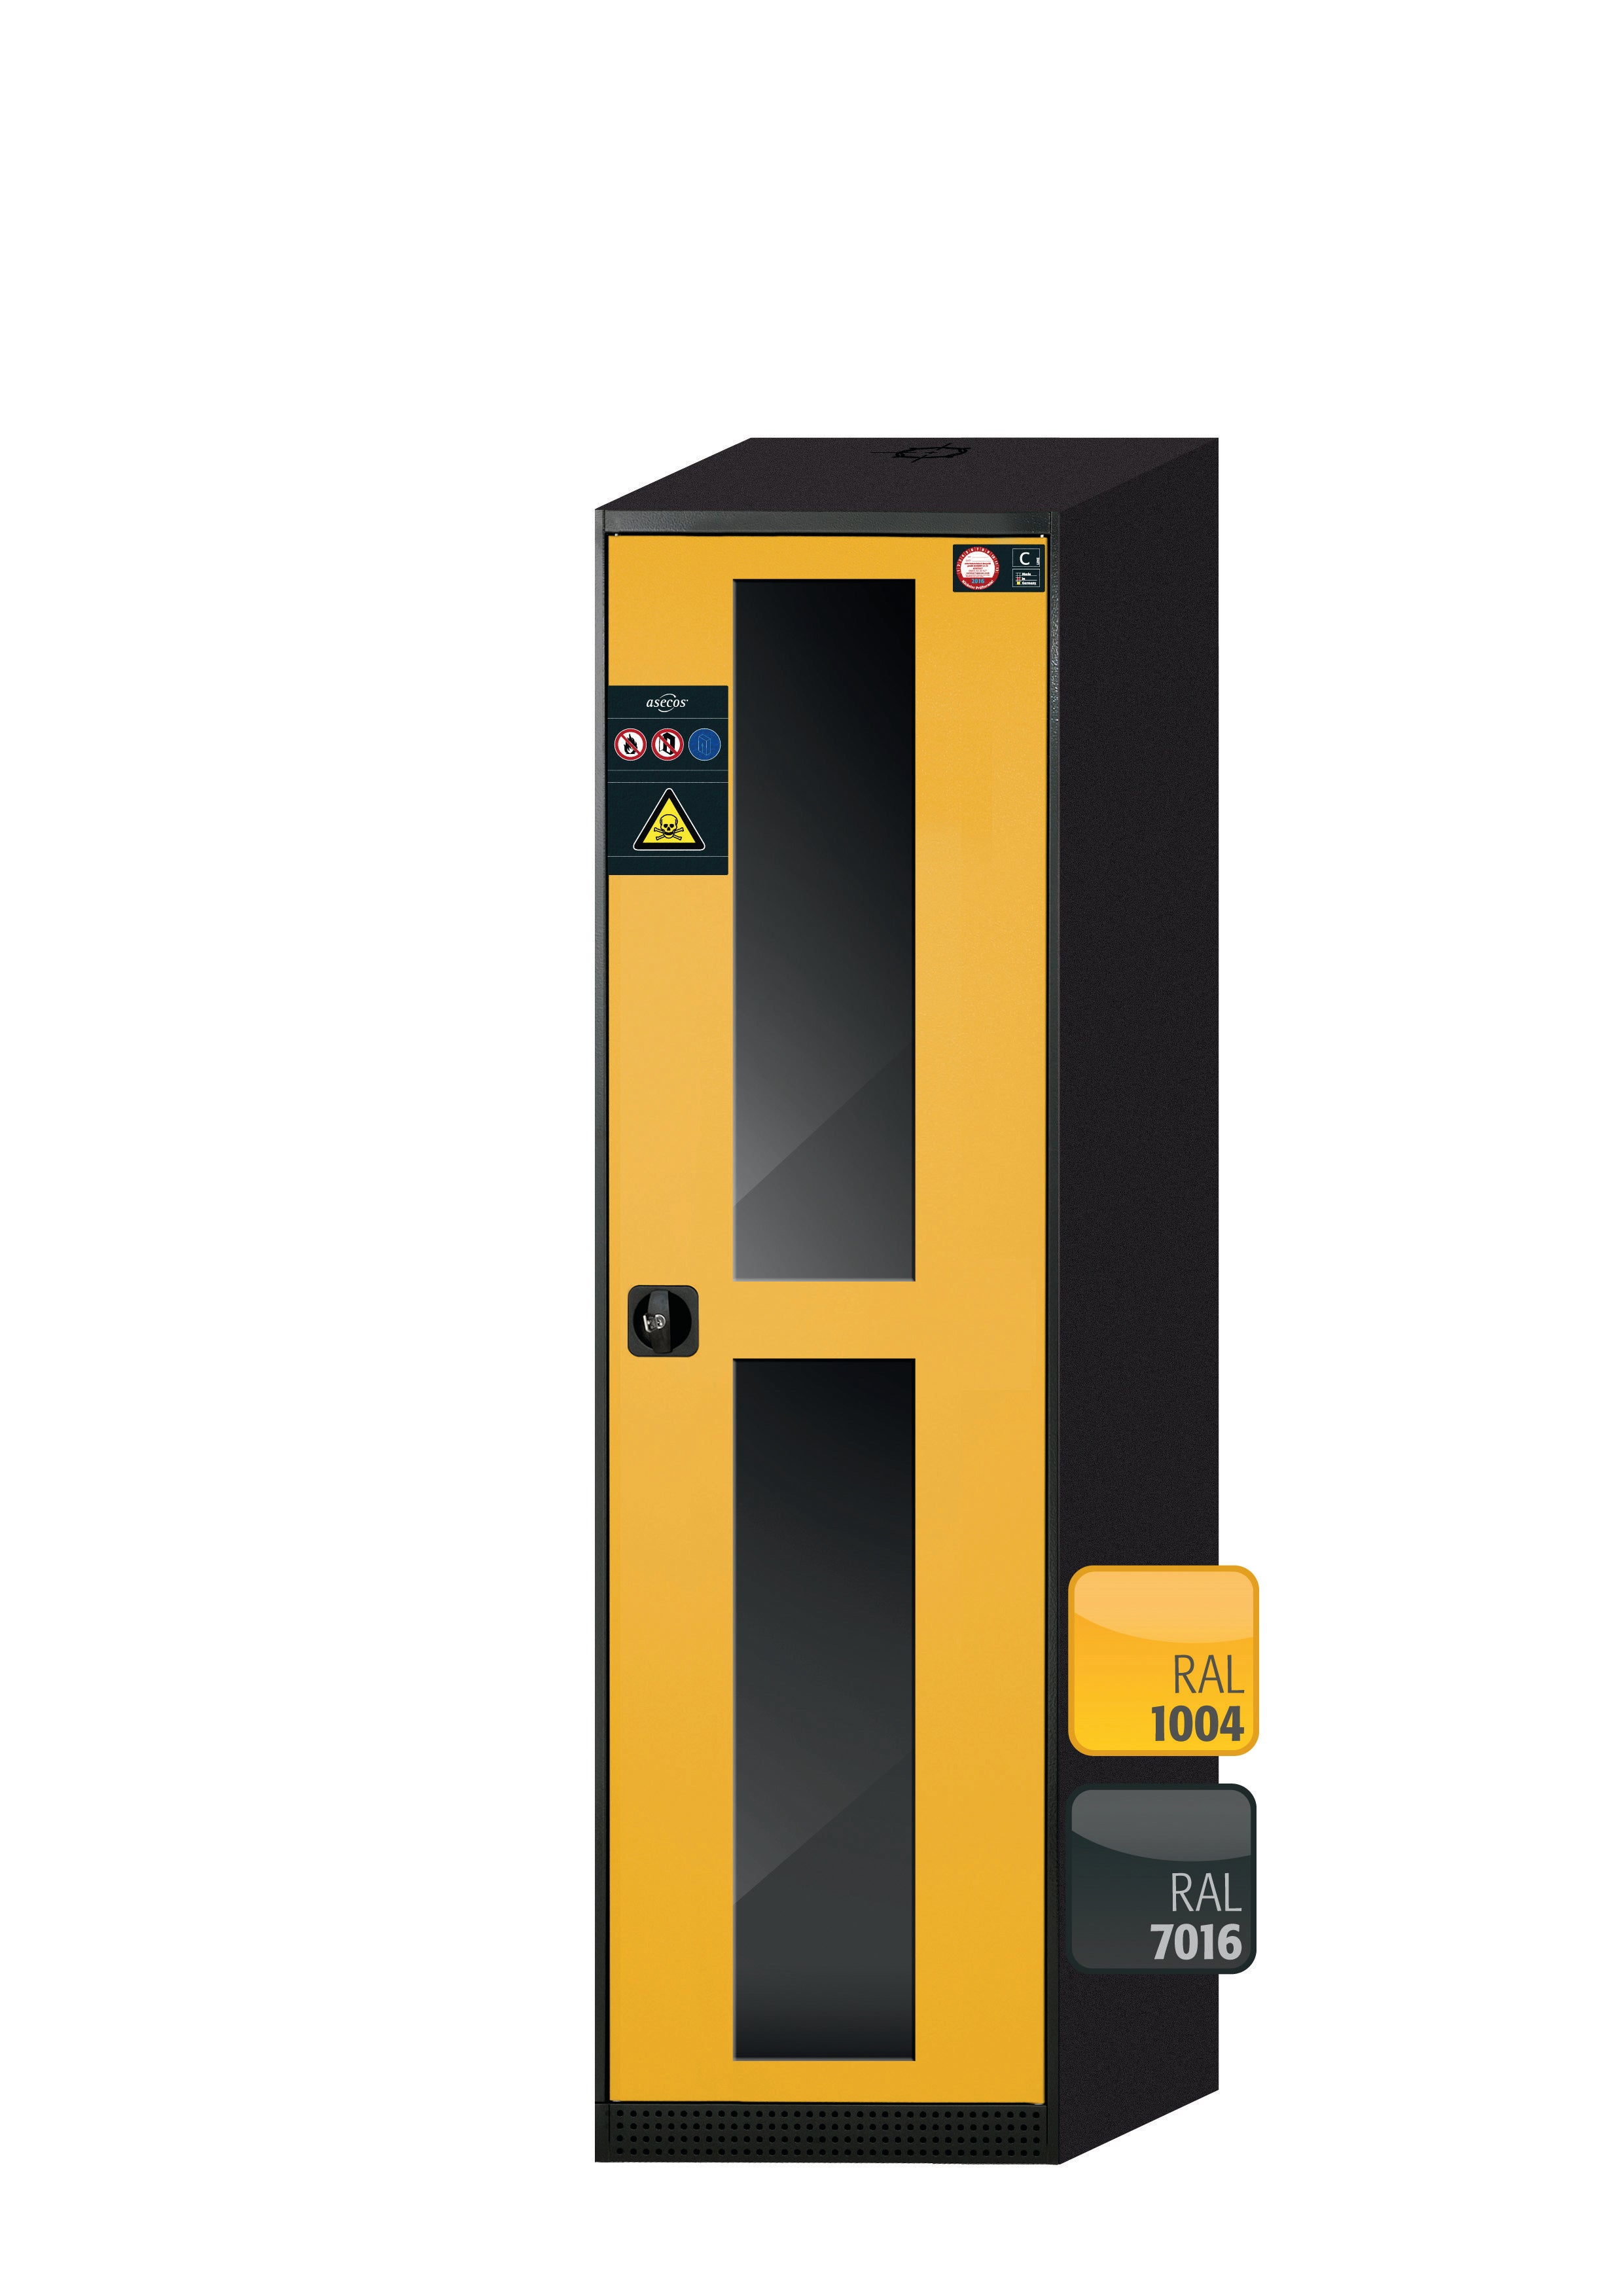 Chemical cabinet CS-CLASSIC-G model CS.195.054.WDFWR in safety yellow RAL 1004 with 3x standard shelves (sheet steel)